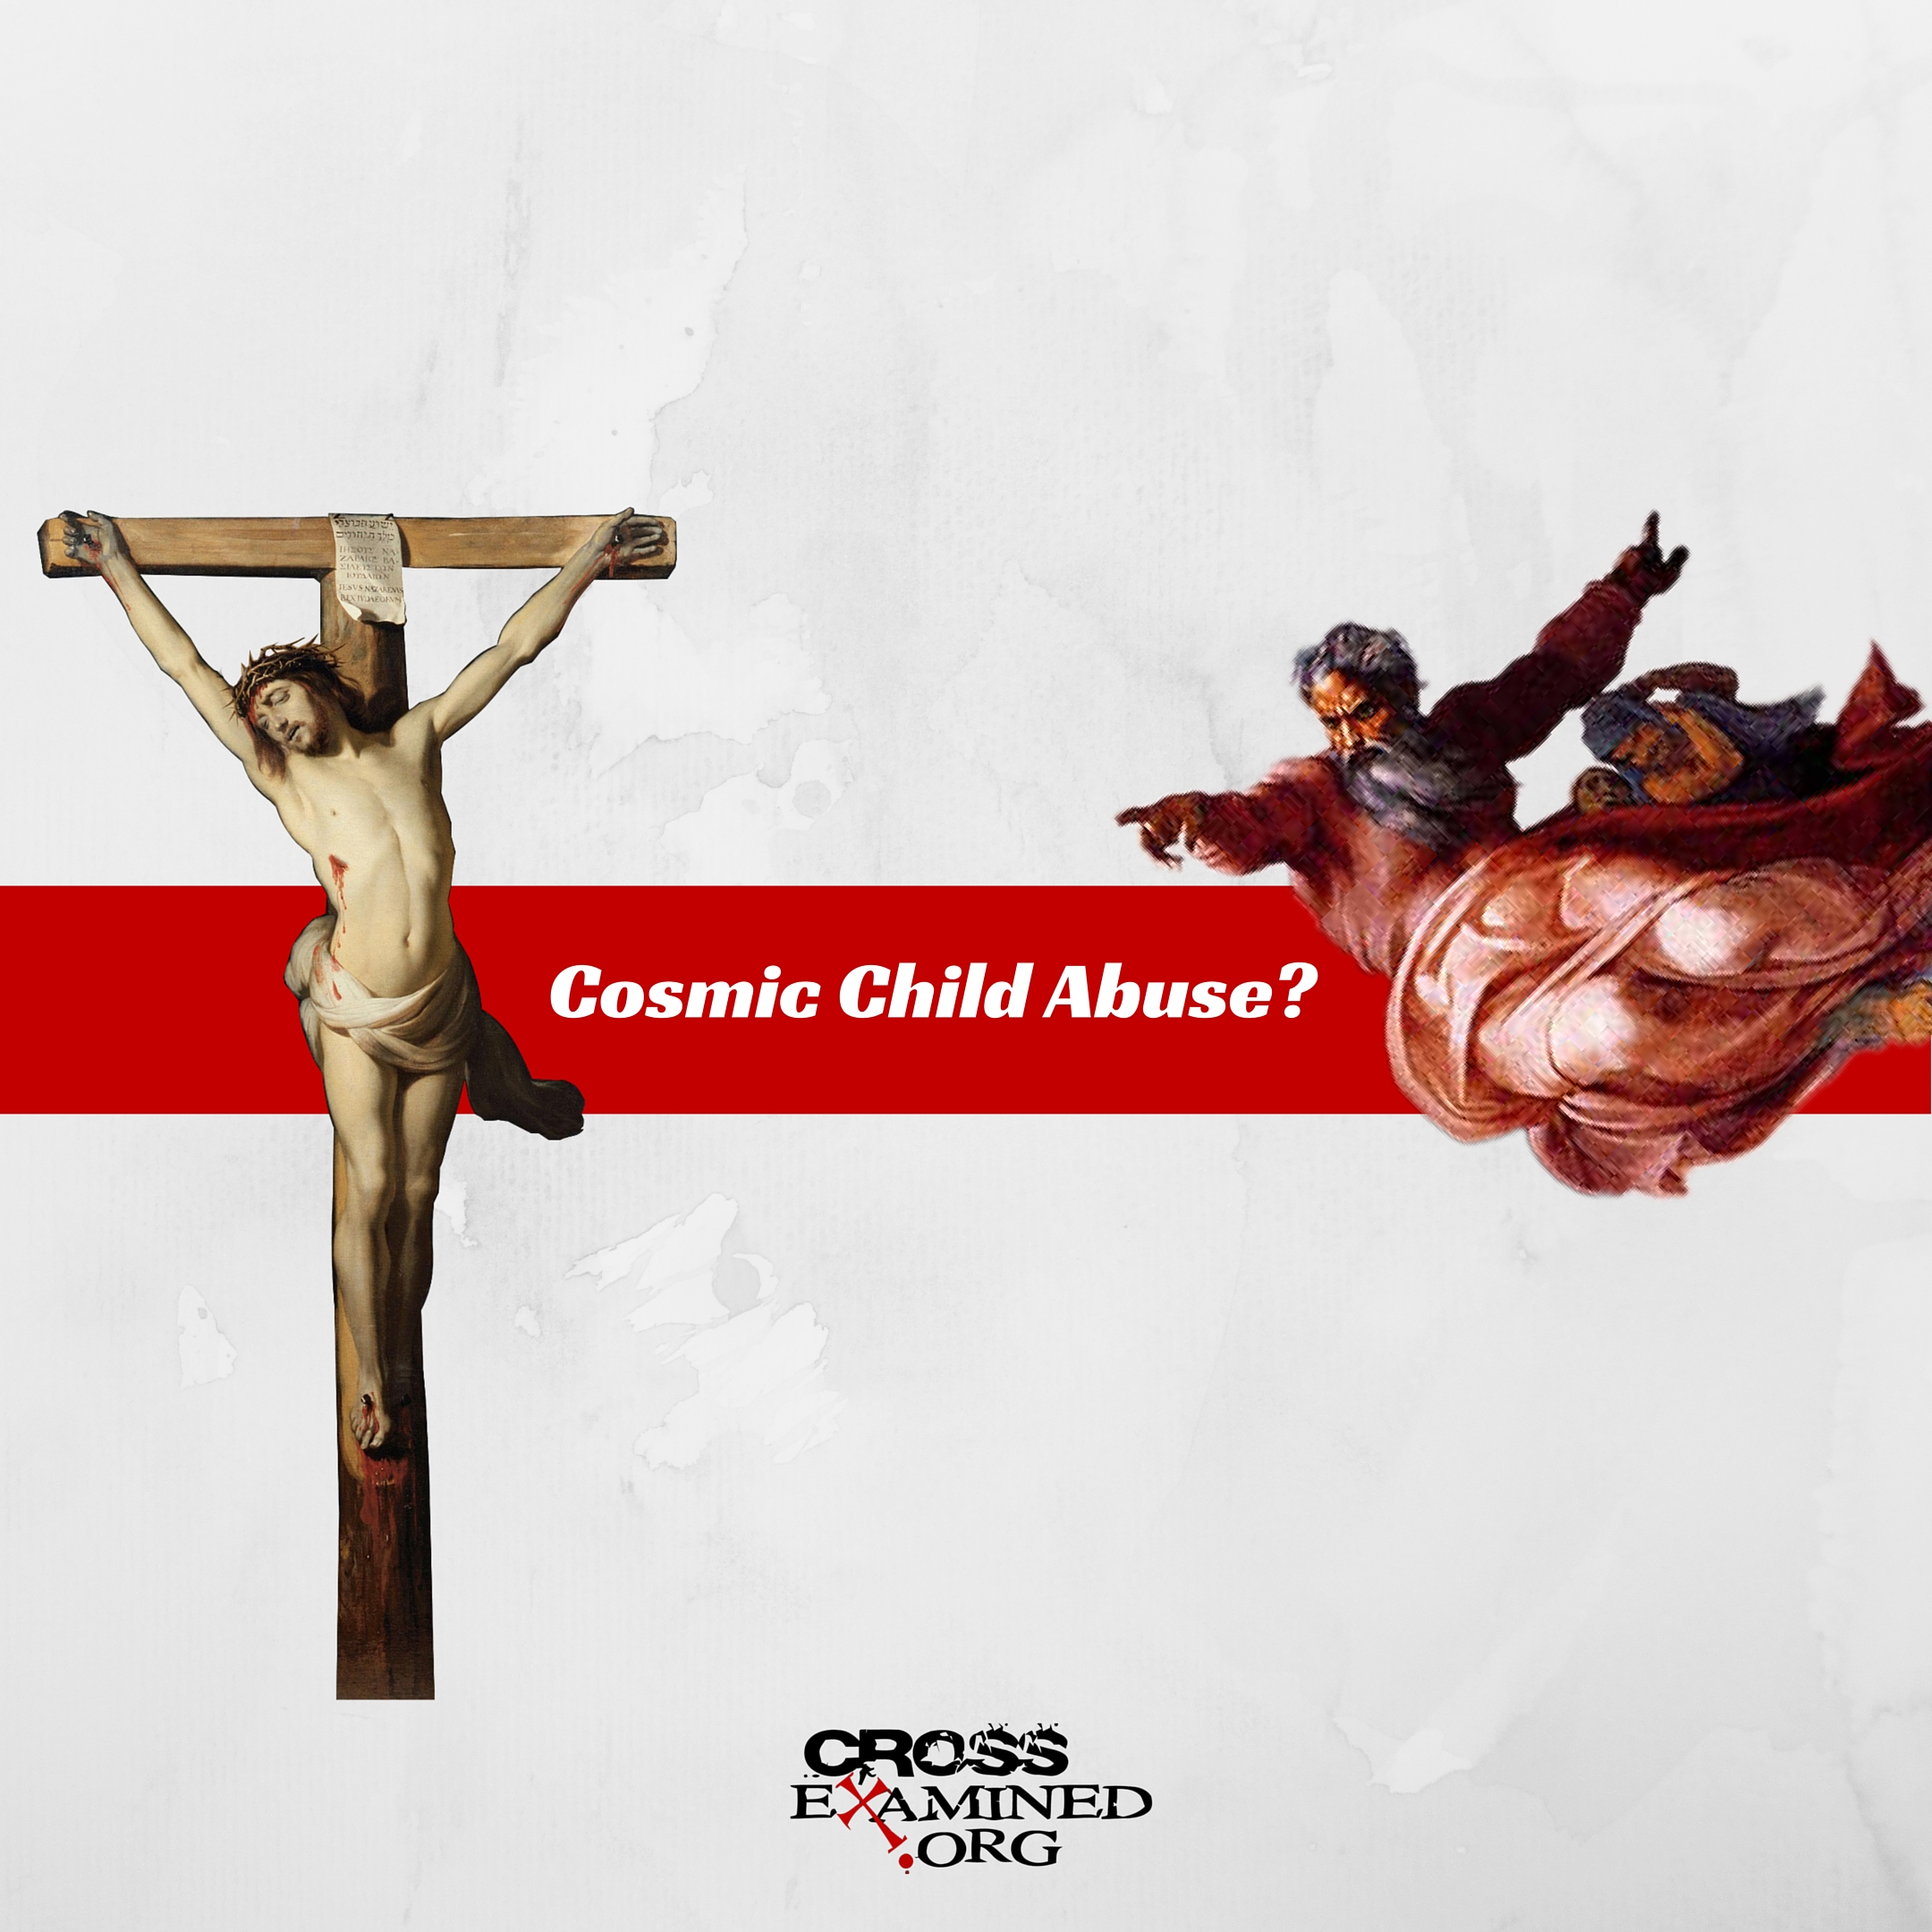 Is the Cross Cosmic Child Abuse?